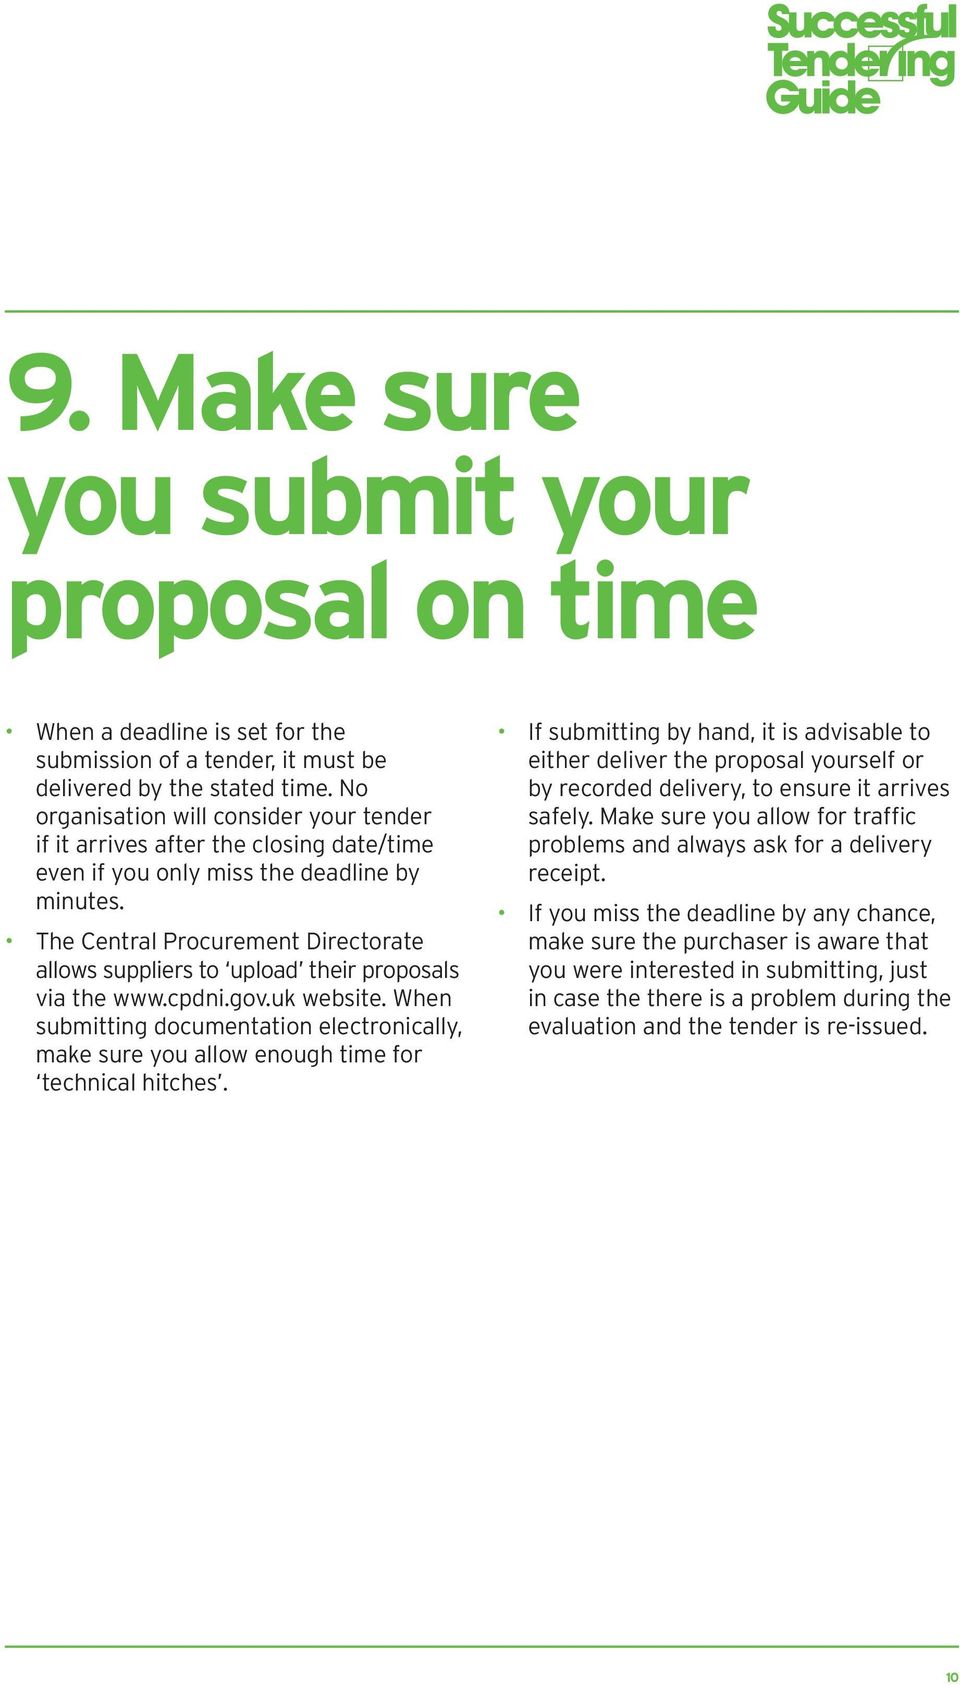 The Central Procurement Directorate allows suppliers to upload their proposals via the www.cpdni.gov.uk website.